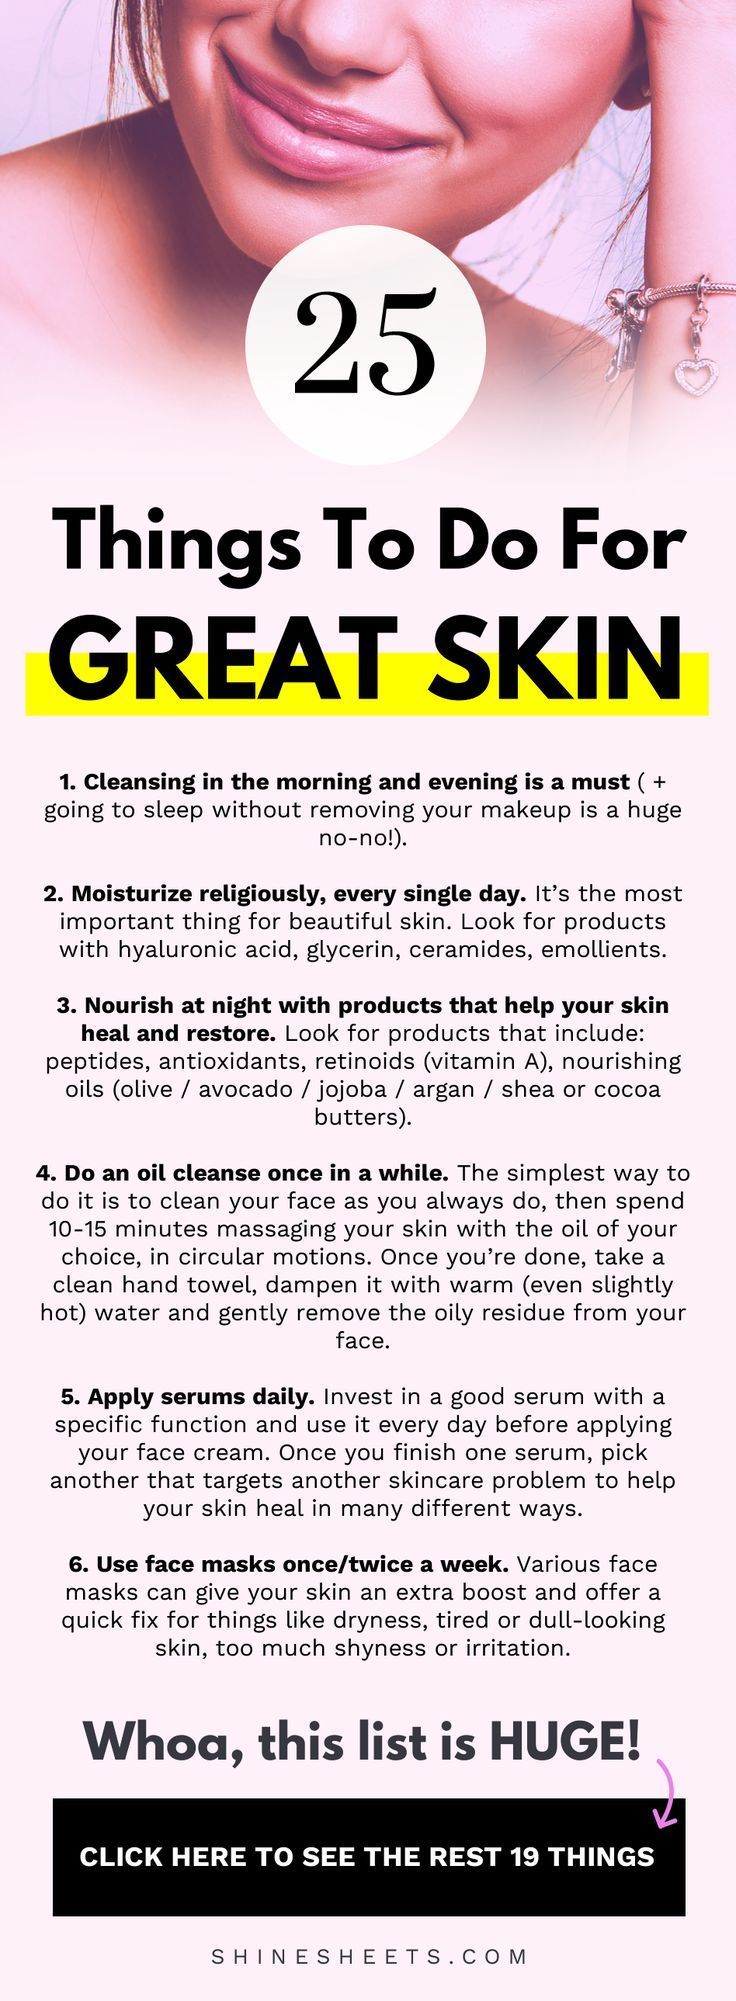 25 Things To Do For Stunning Skin - 25 Things To Do For Stunning Skin -   12 beauty care & skincare ideas